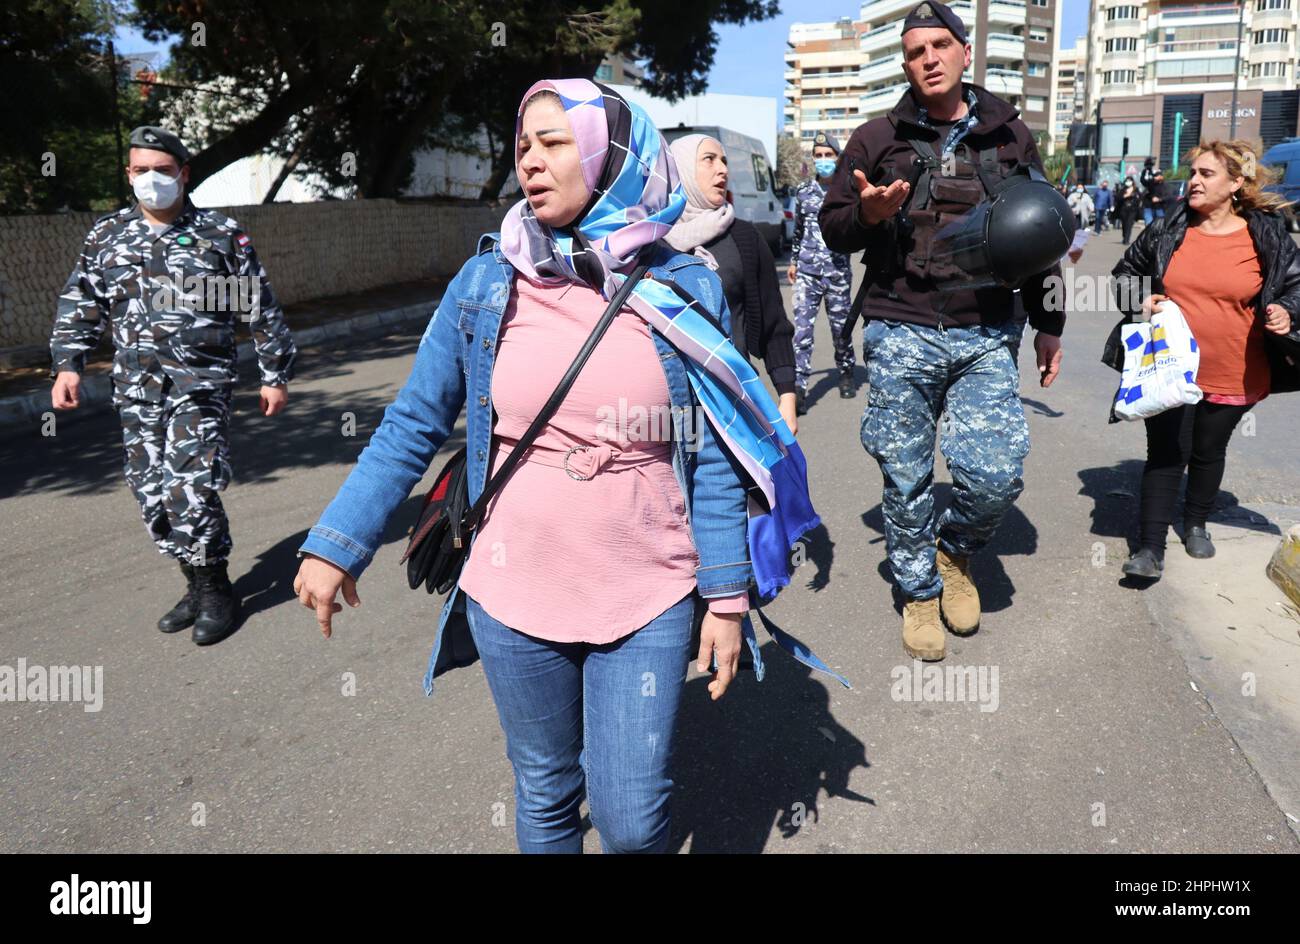 Mothers of students in Ukraine Universities, desperate for their children's life, try to enter the Unesco Palace to be heard by Parlamentarians, Beirut, Lebanon, February 21, 2022. They are members of the Lebanese Association of Parents of Students in Foreign Universities, who protest in front of Unesco Palace where the Lebanese Parliament run a plenary session. The families of students in Ukraine, worried for the incoming war, denounce the delayed application of the 'Student Dollar Law', which should allow them transfers of up to USD 10,000 at a lower exchange rate. Currently, Lebanese st Stock Photo